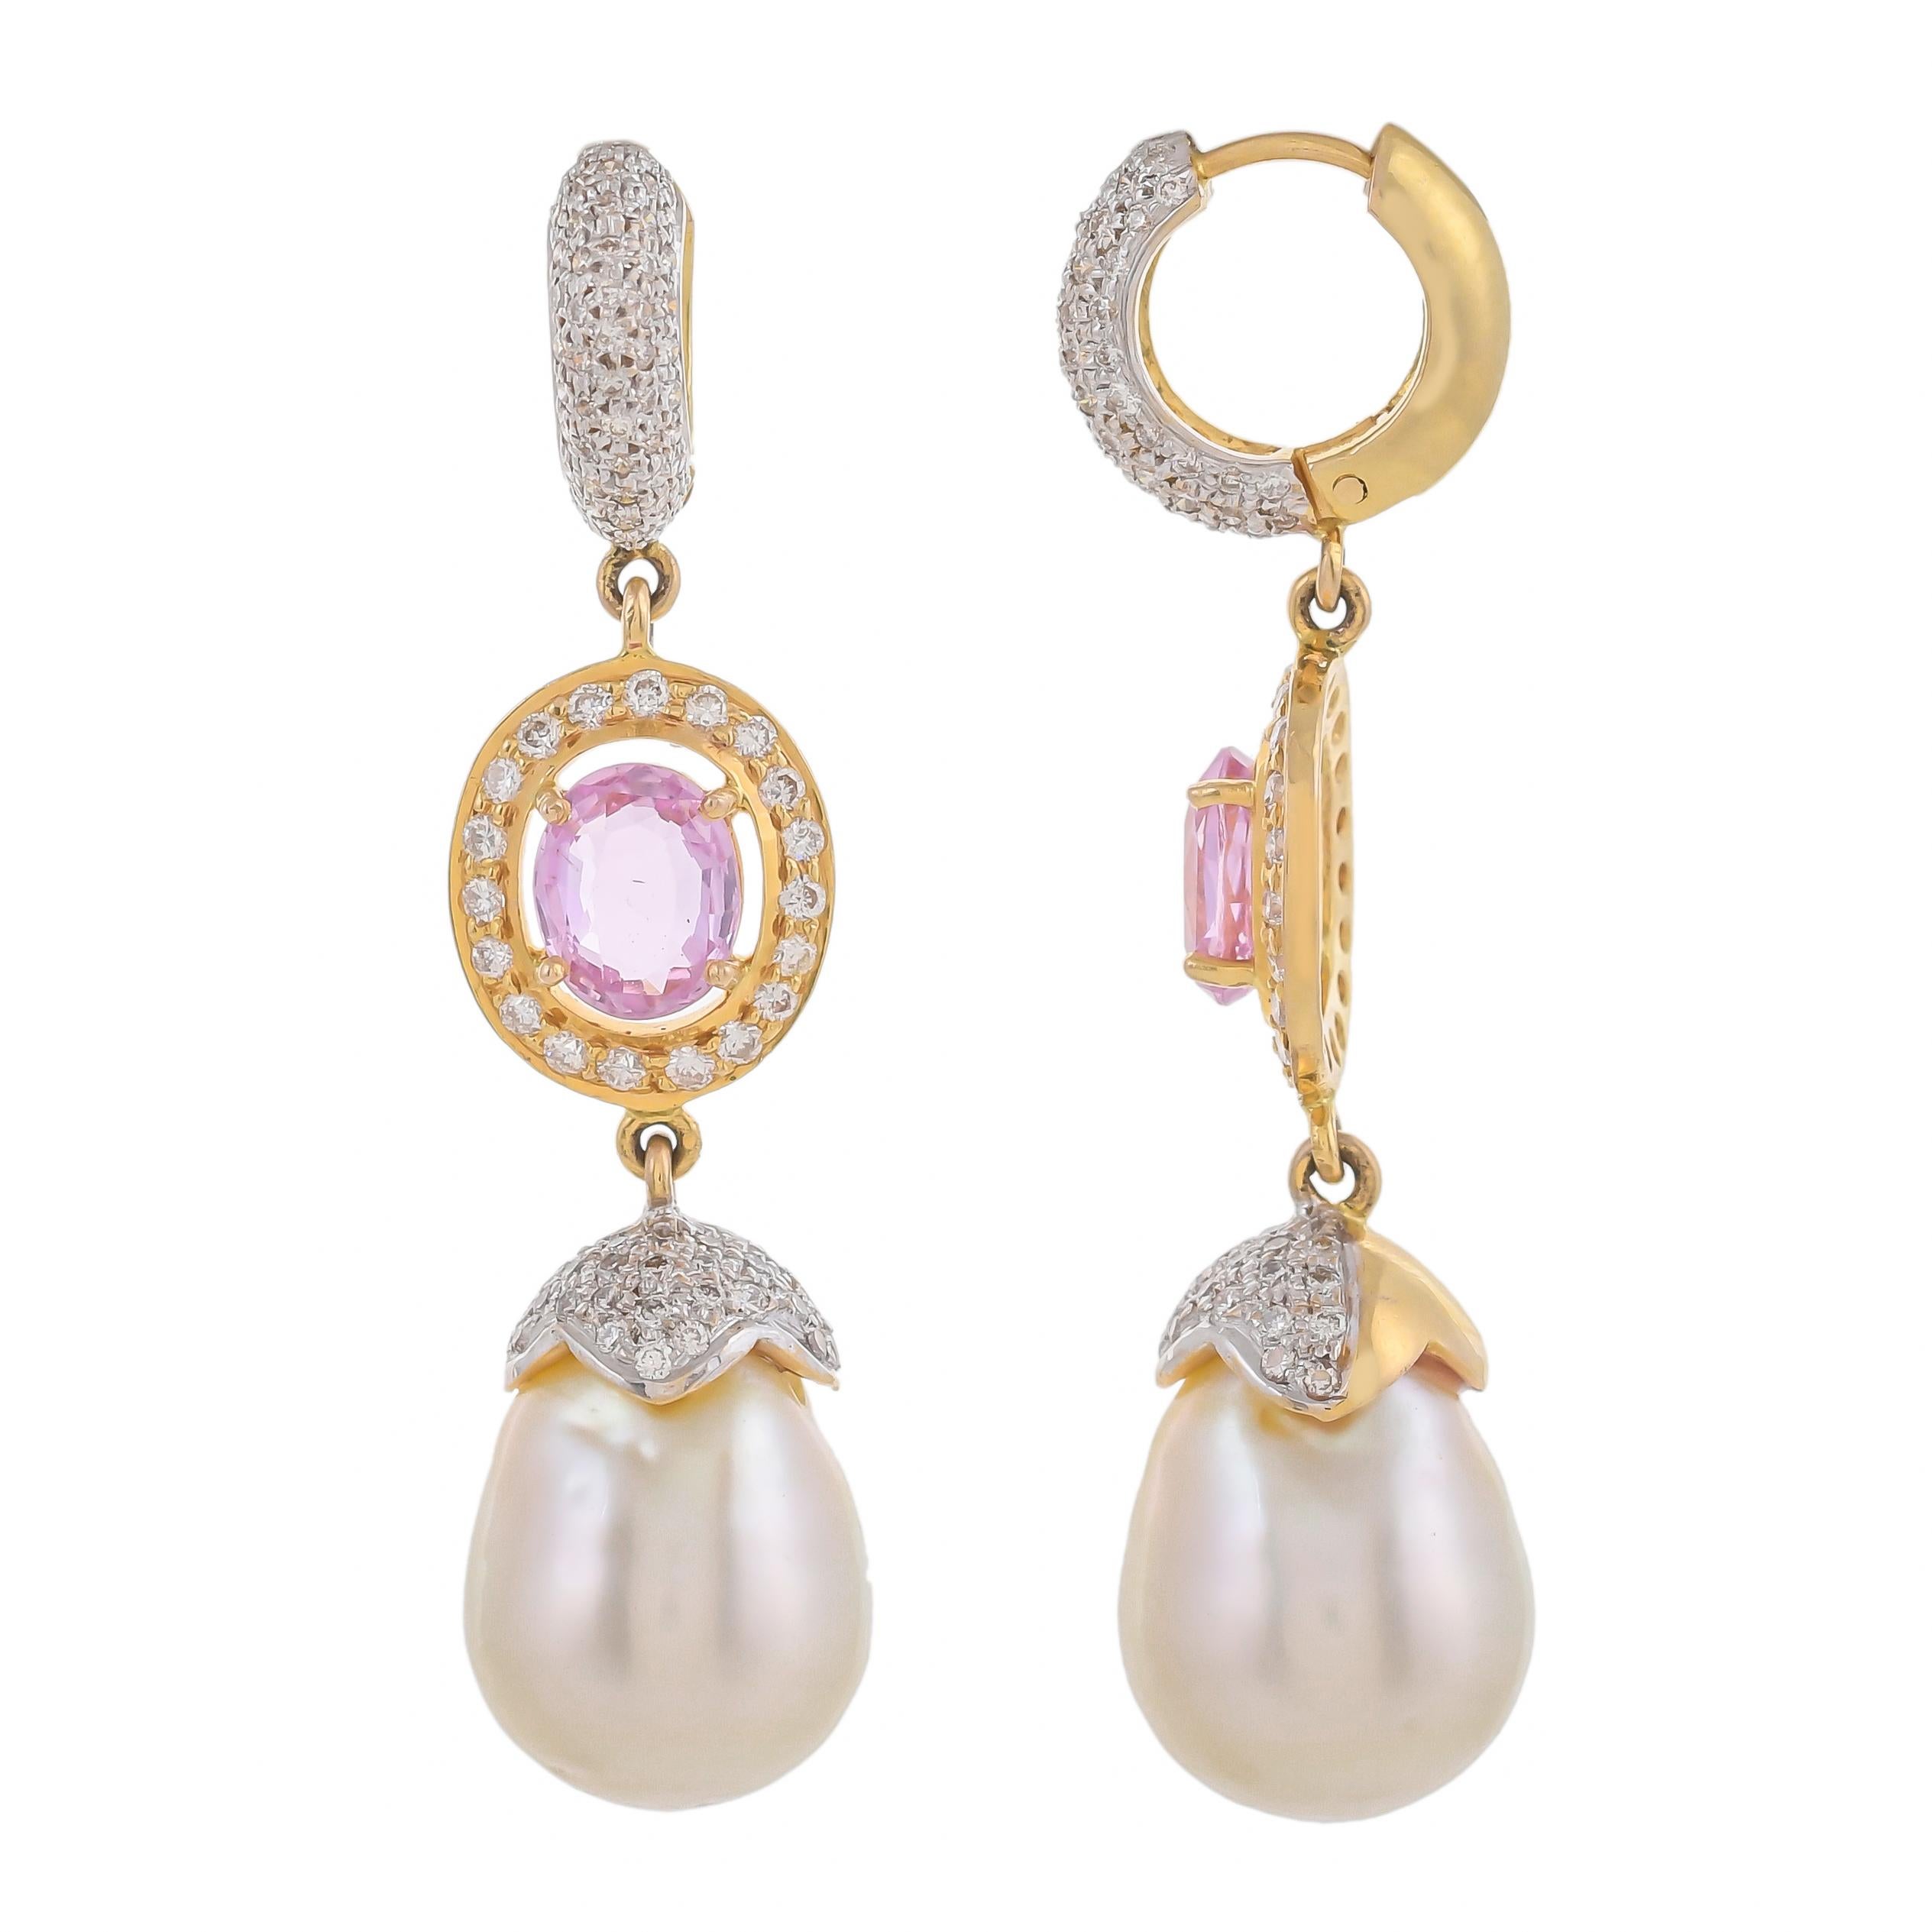 Each designed as a drop-shaped South sea pearl, weighing approximately 37.17 carats in total with a diamond-set cap, suspended from a 3.14 carats pink sapphire surrounded with brilliant round cut diamonds to a diamond set hoop with a total diamond